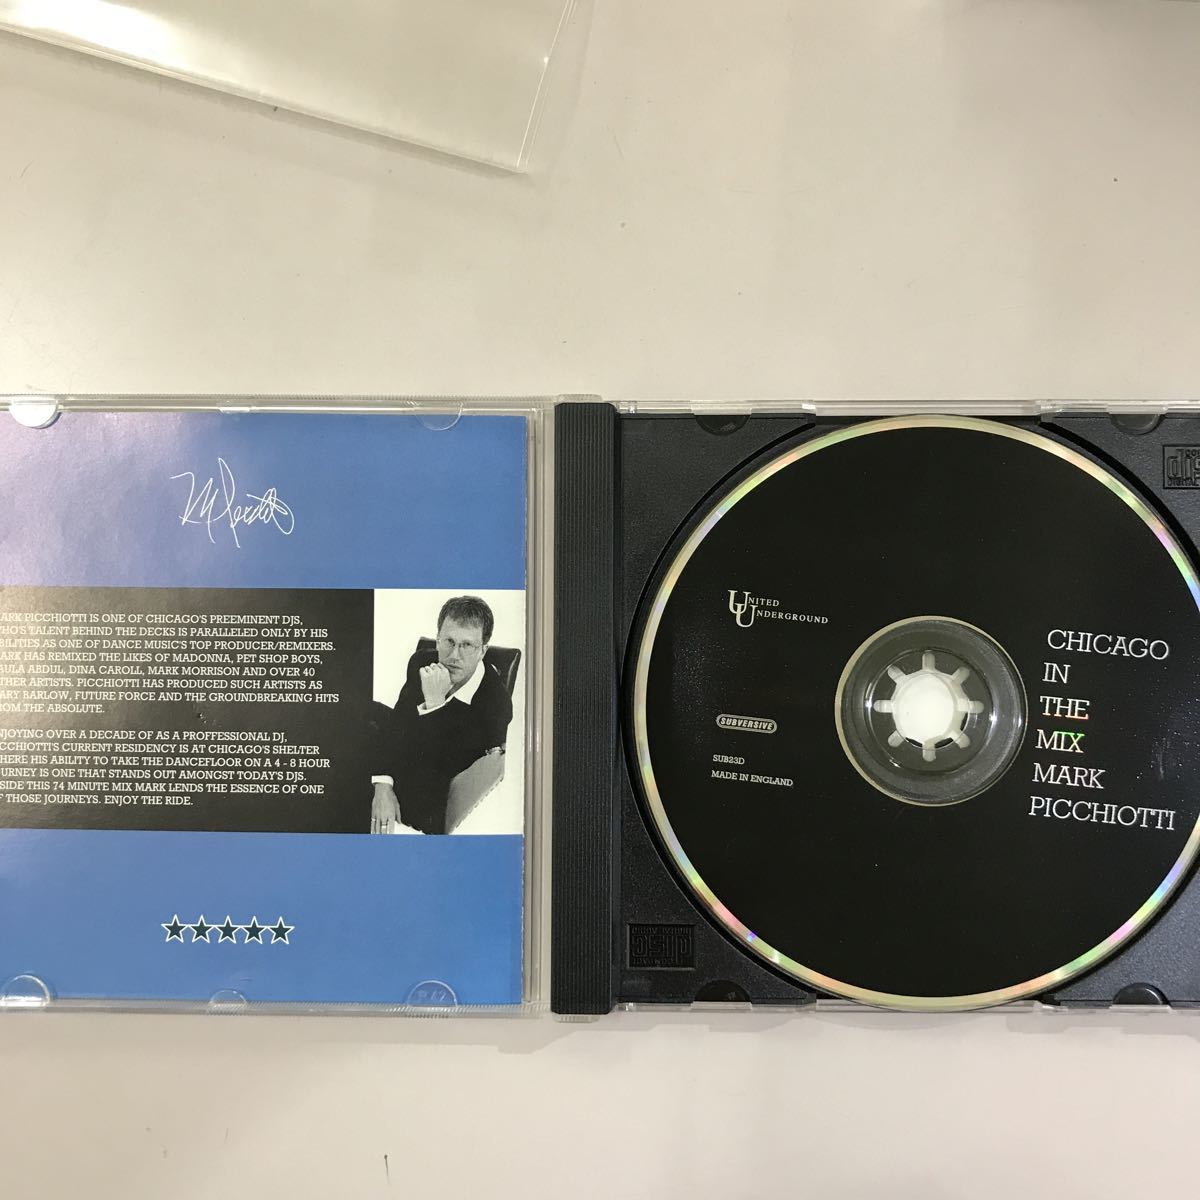 CD 中古☆【洋楽】CHICAGO IN THE MIX/MARK PICCHIOTTI